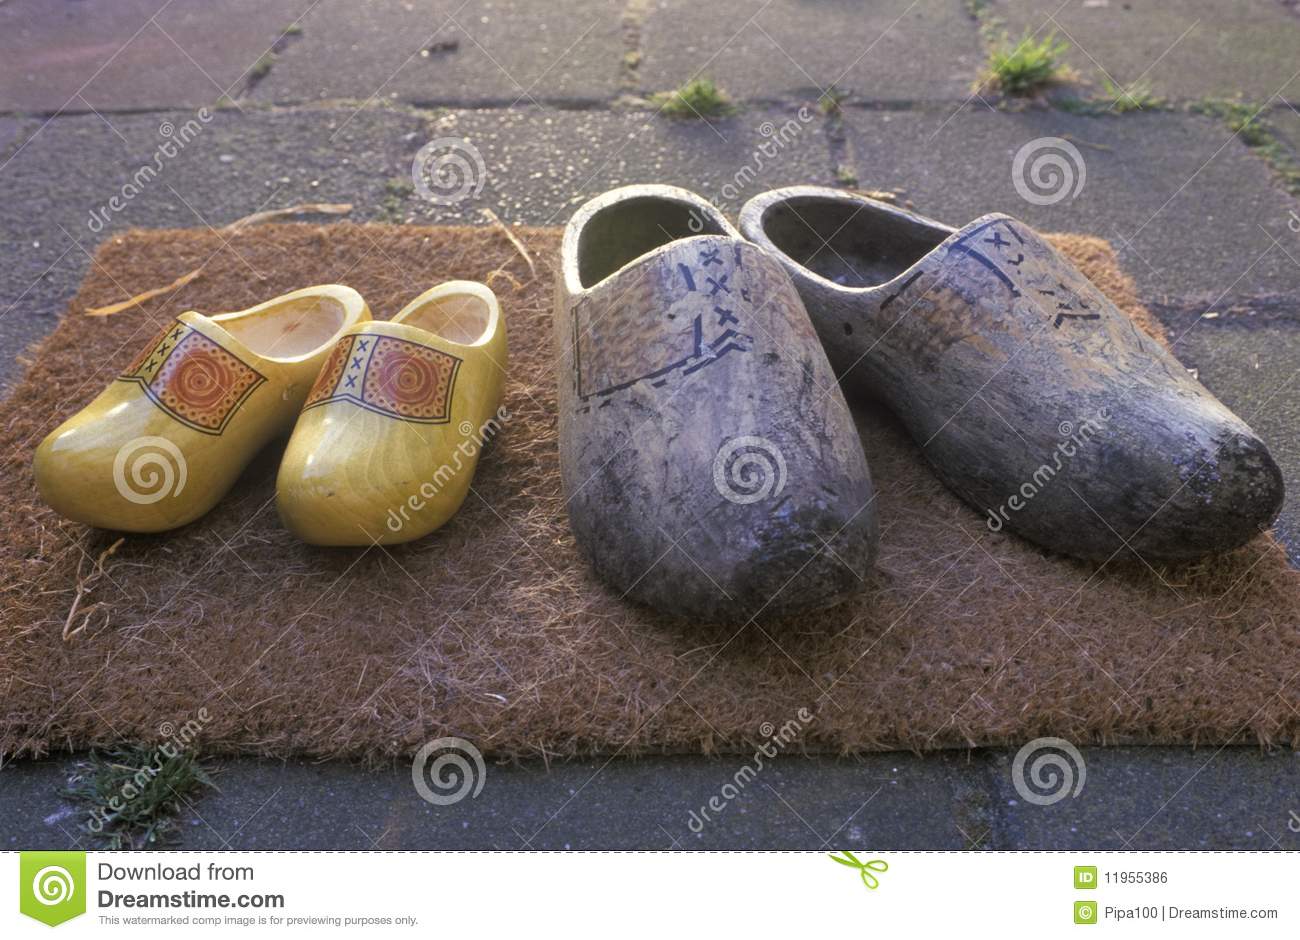 Dutch Wooden Shoes Royalty Free Stock Image   Image  11955386